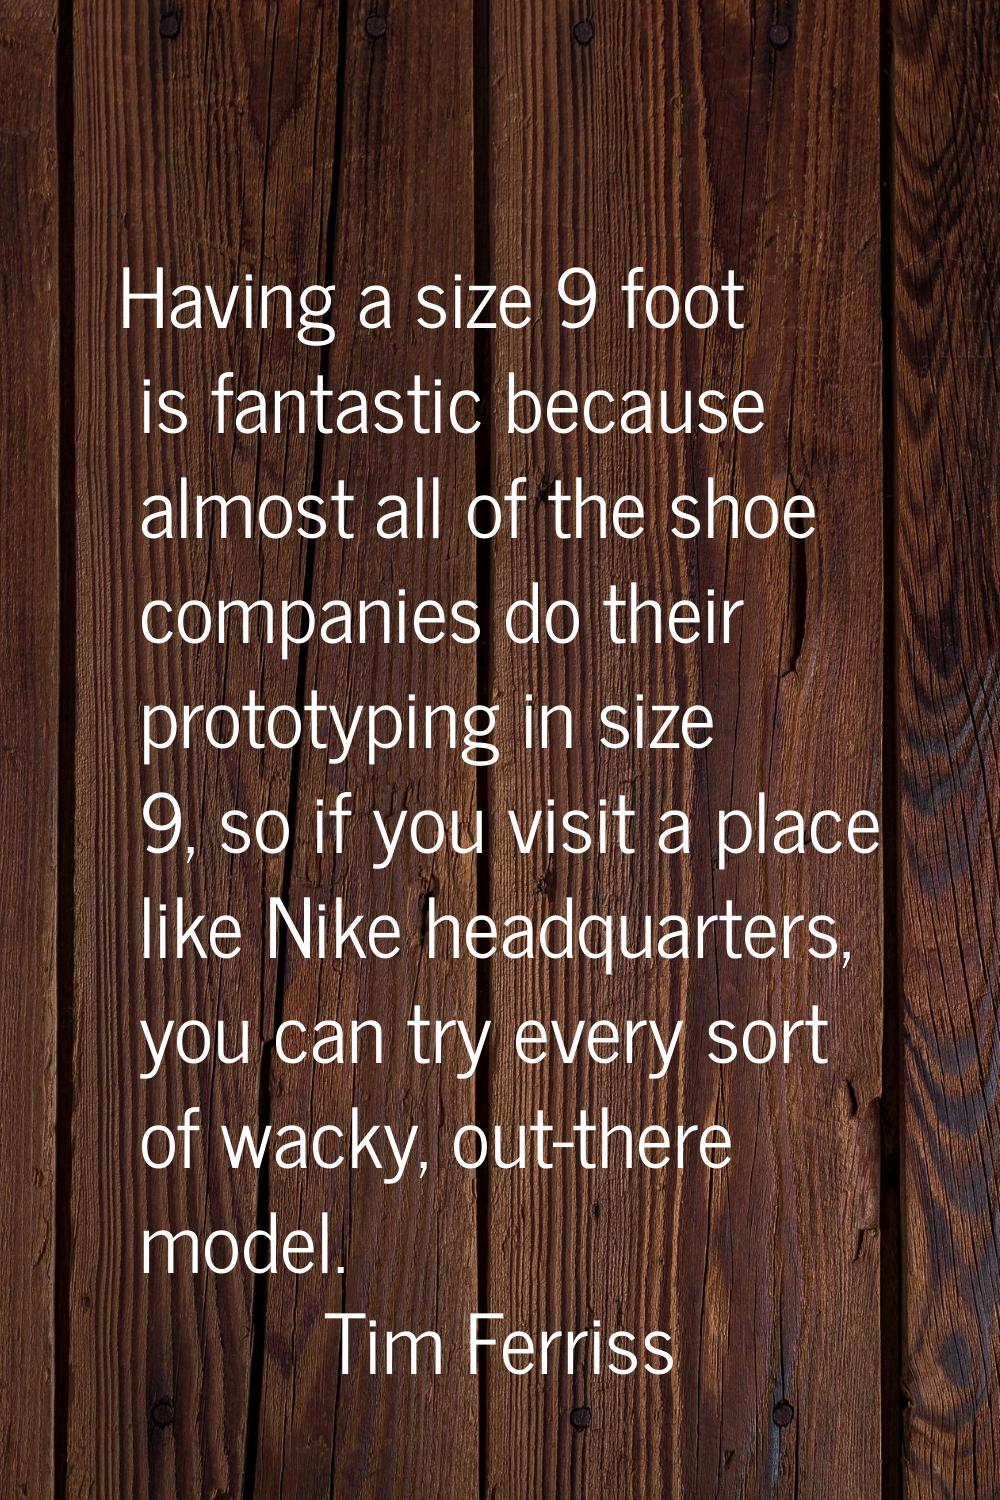 Having a size 9 foot is fantastic because almost all of the shoe companies do their prototyping in 